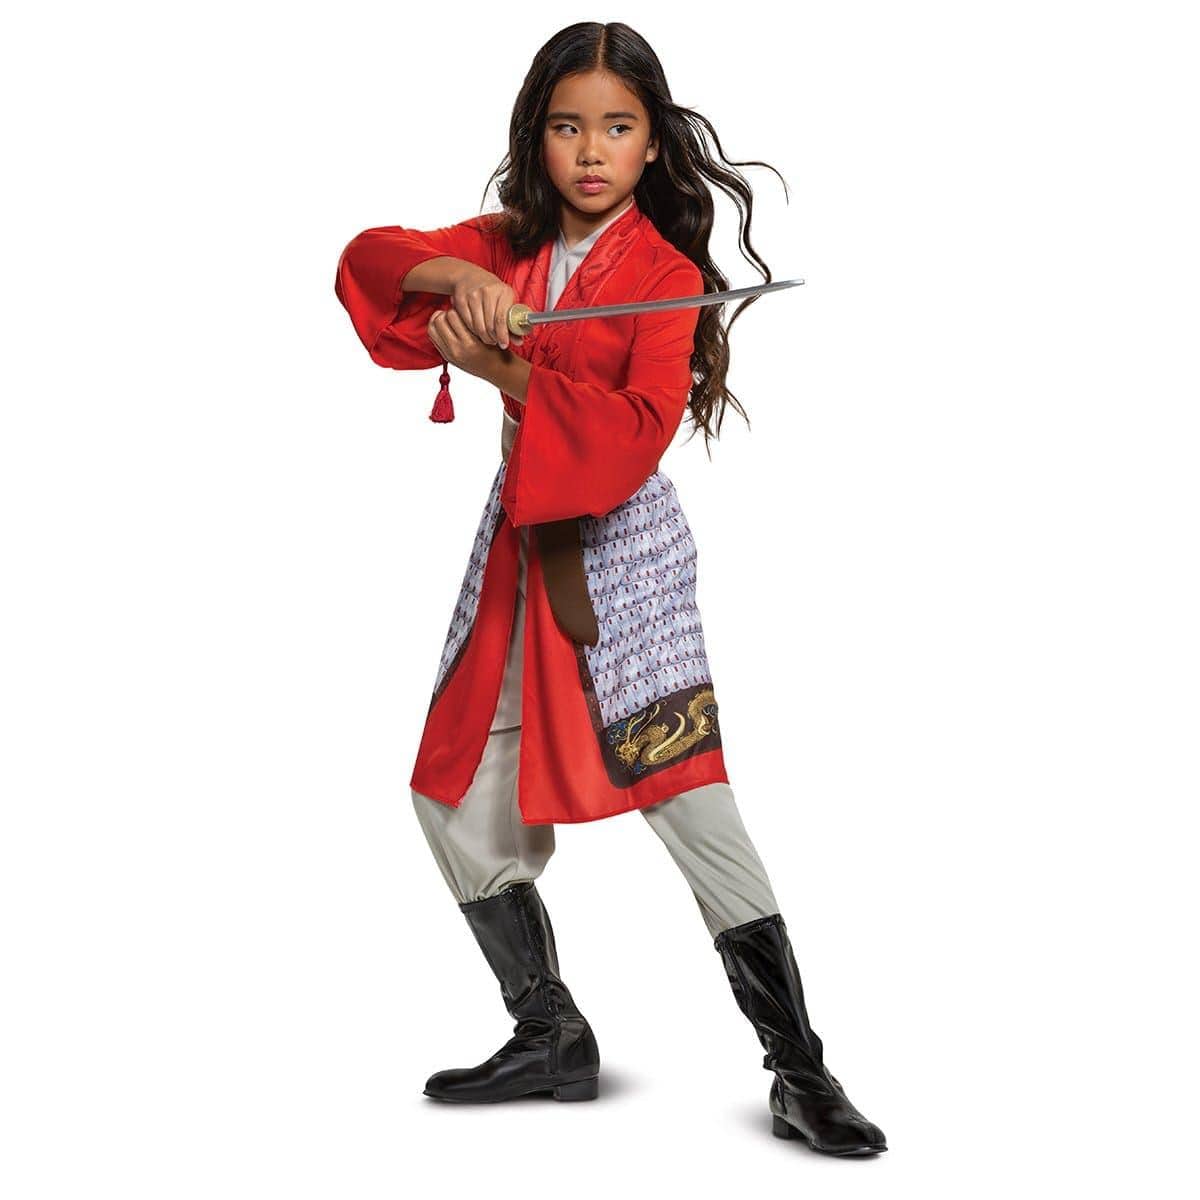 Buy Costumes Mulan Deluxe Costume for Kids, Mulan sold at Party Expert